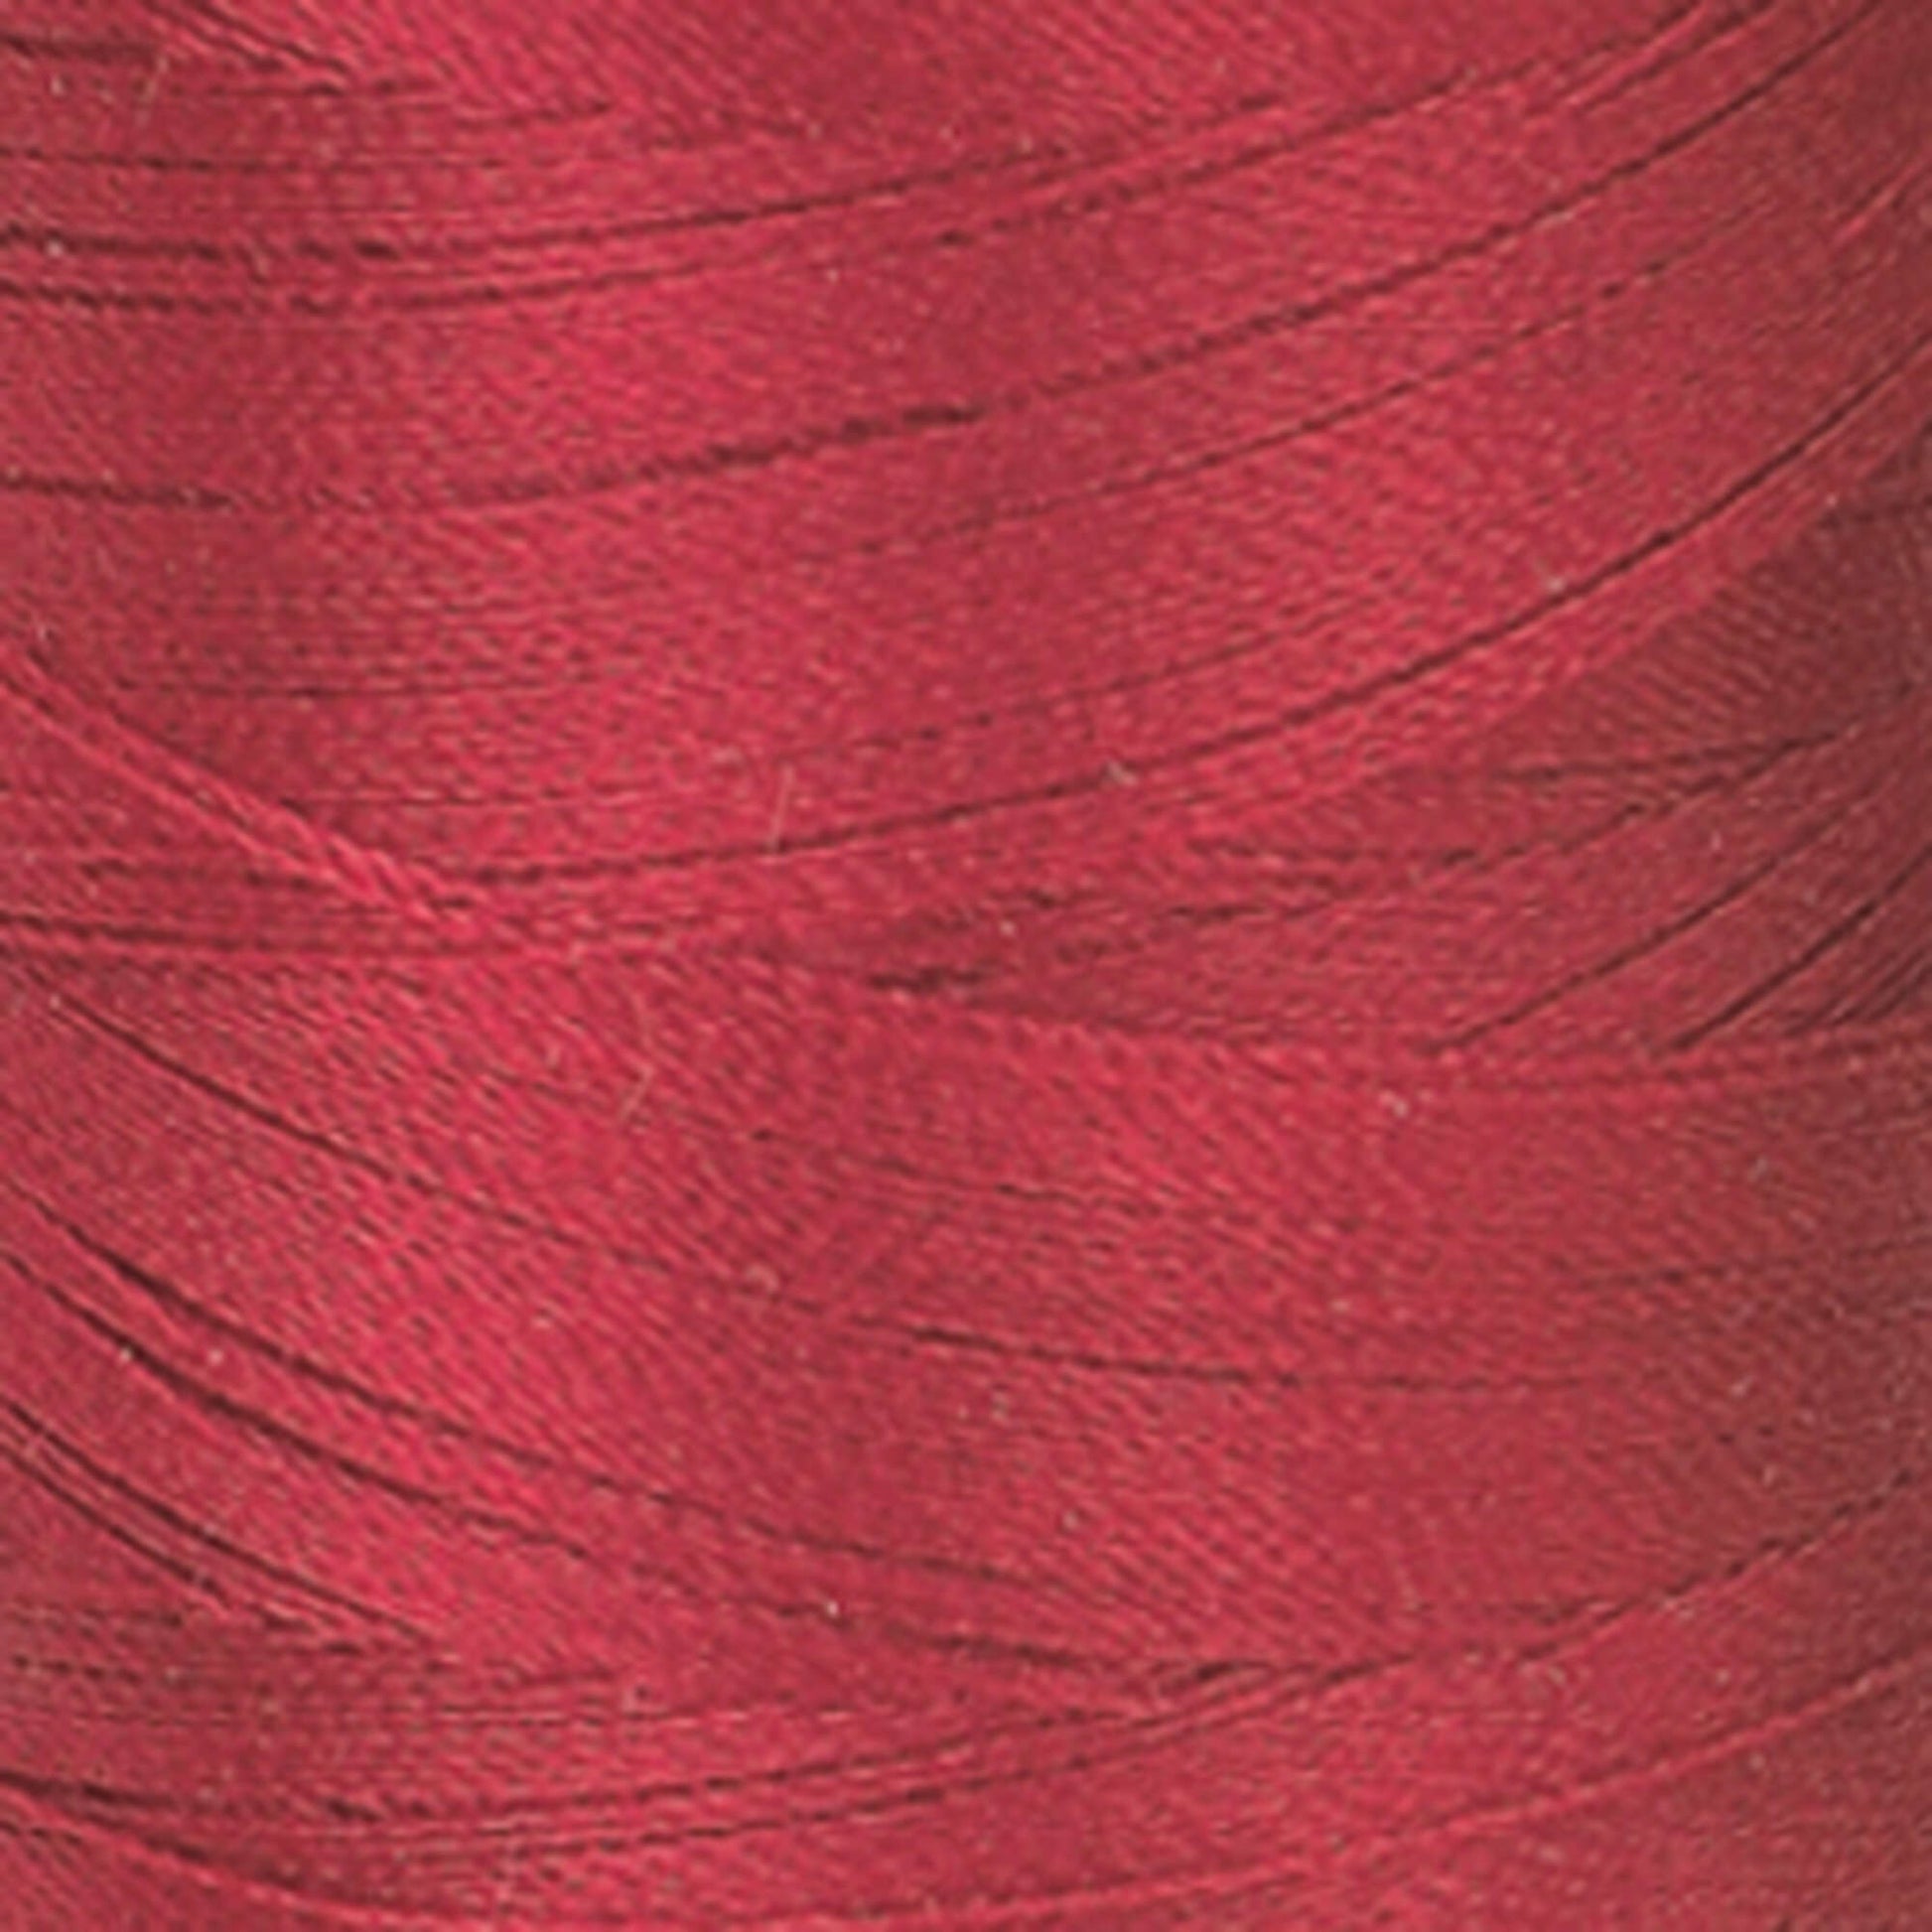 Coats & Clark Machine Embroidery Thread (1100 Yards) Barberry Red